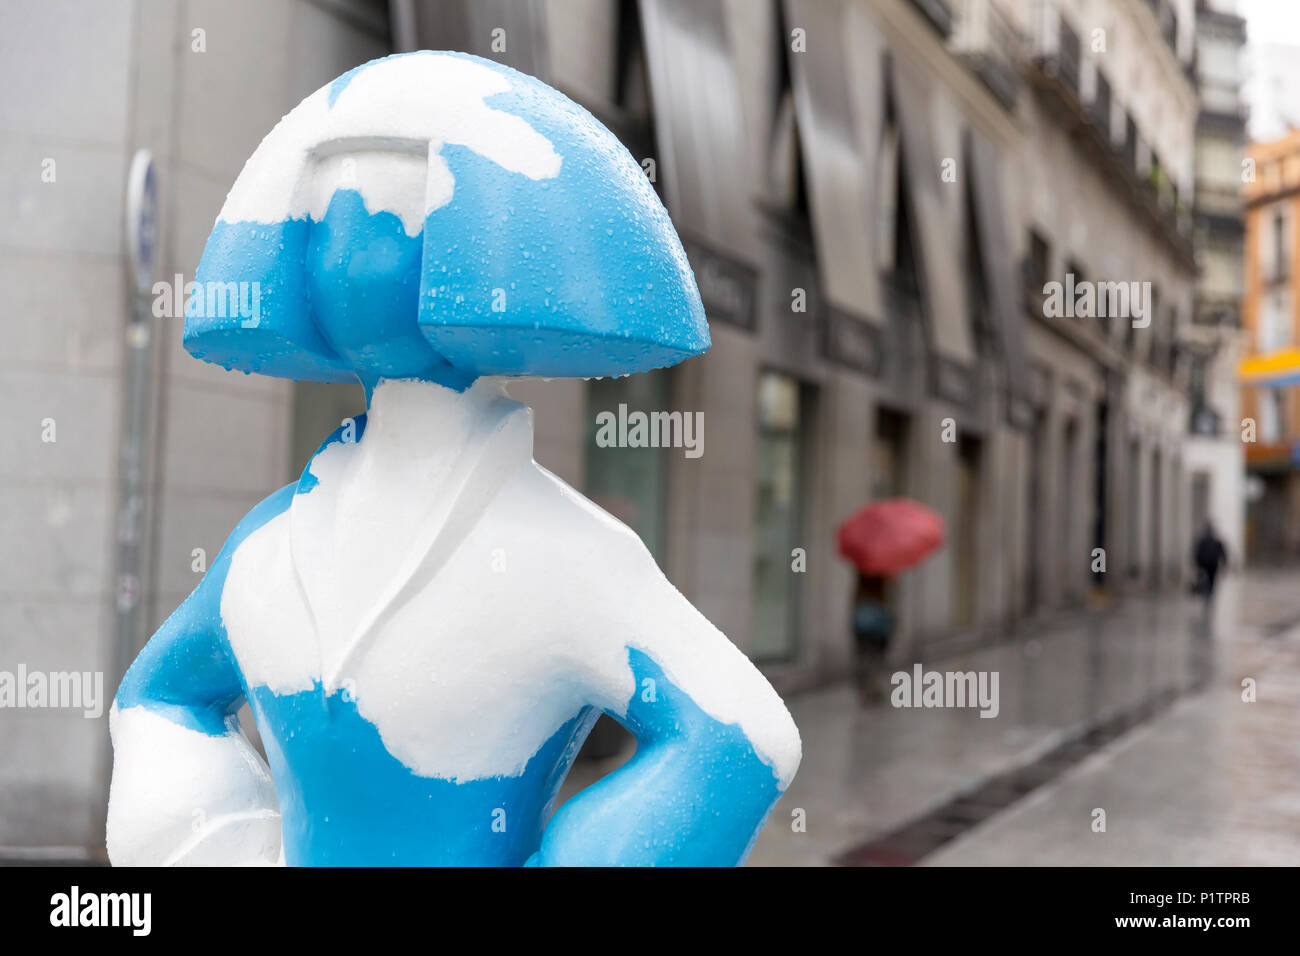 Madrid, Spain: A woman with an umbrella passes a 'Menina' sculpture along Calle de Tetuán. The sculpture is part of the 'Meninas Madrid Gallery' in tr Stock Photo